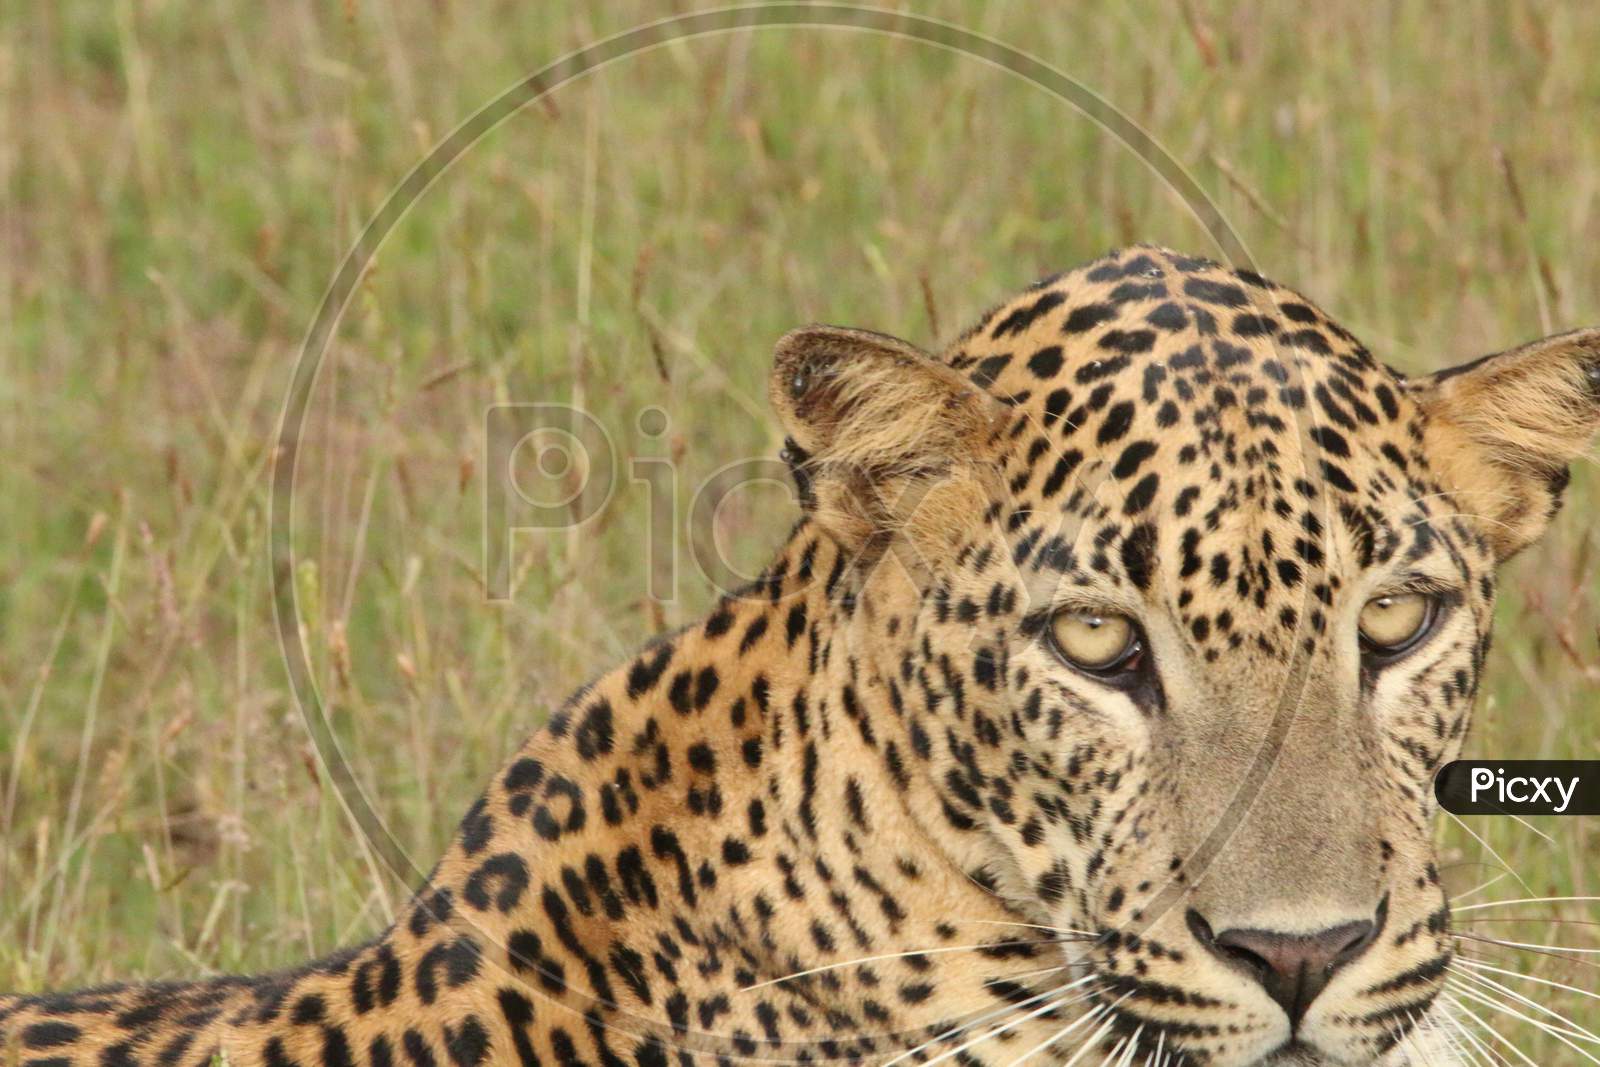 Sri Lankan Leopard resting on the grass after a hunt